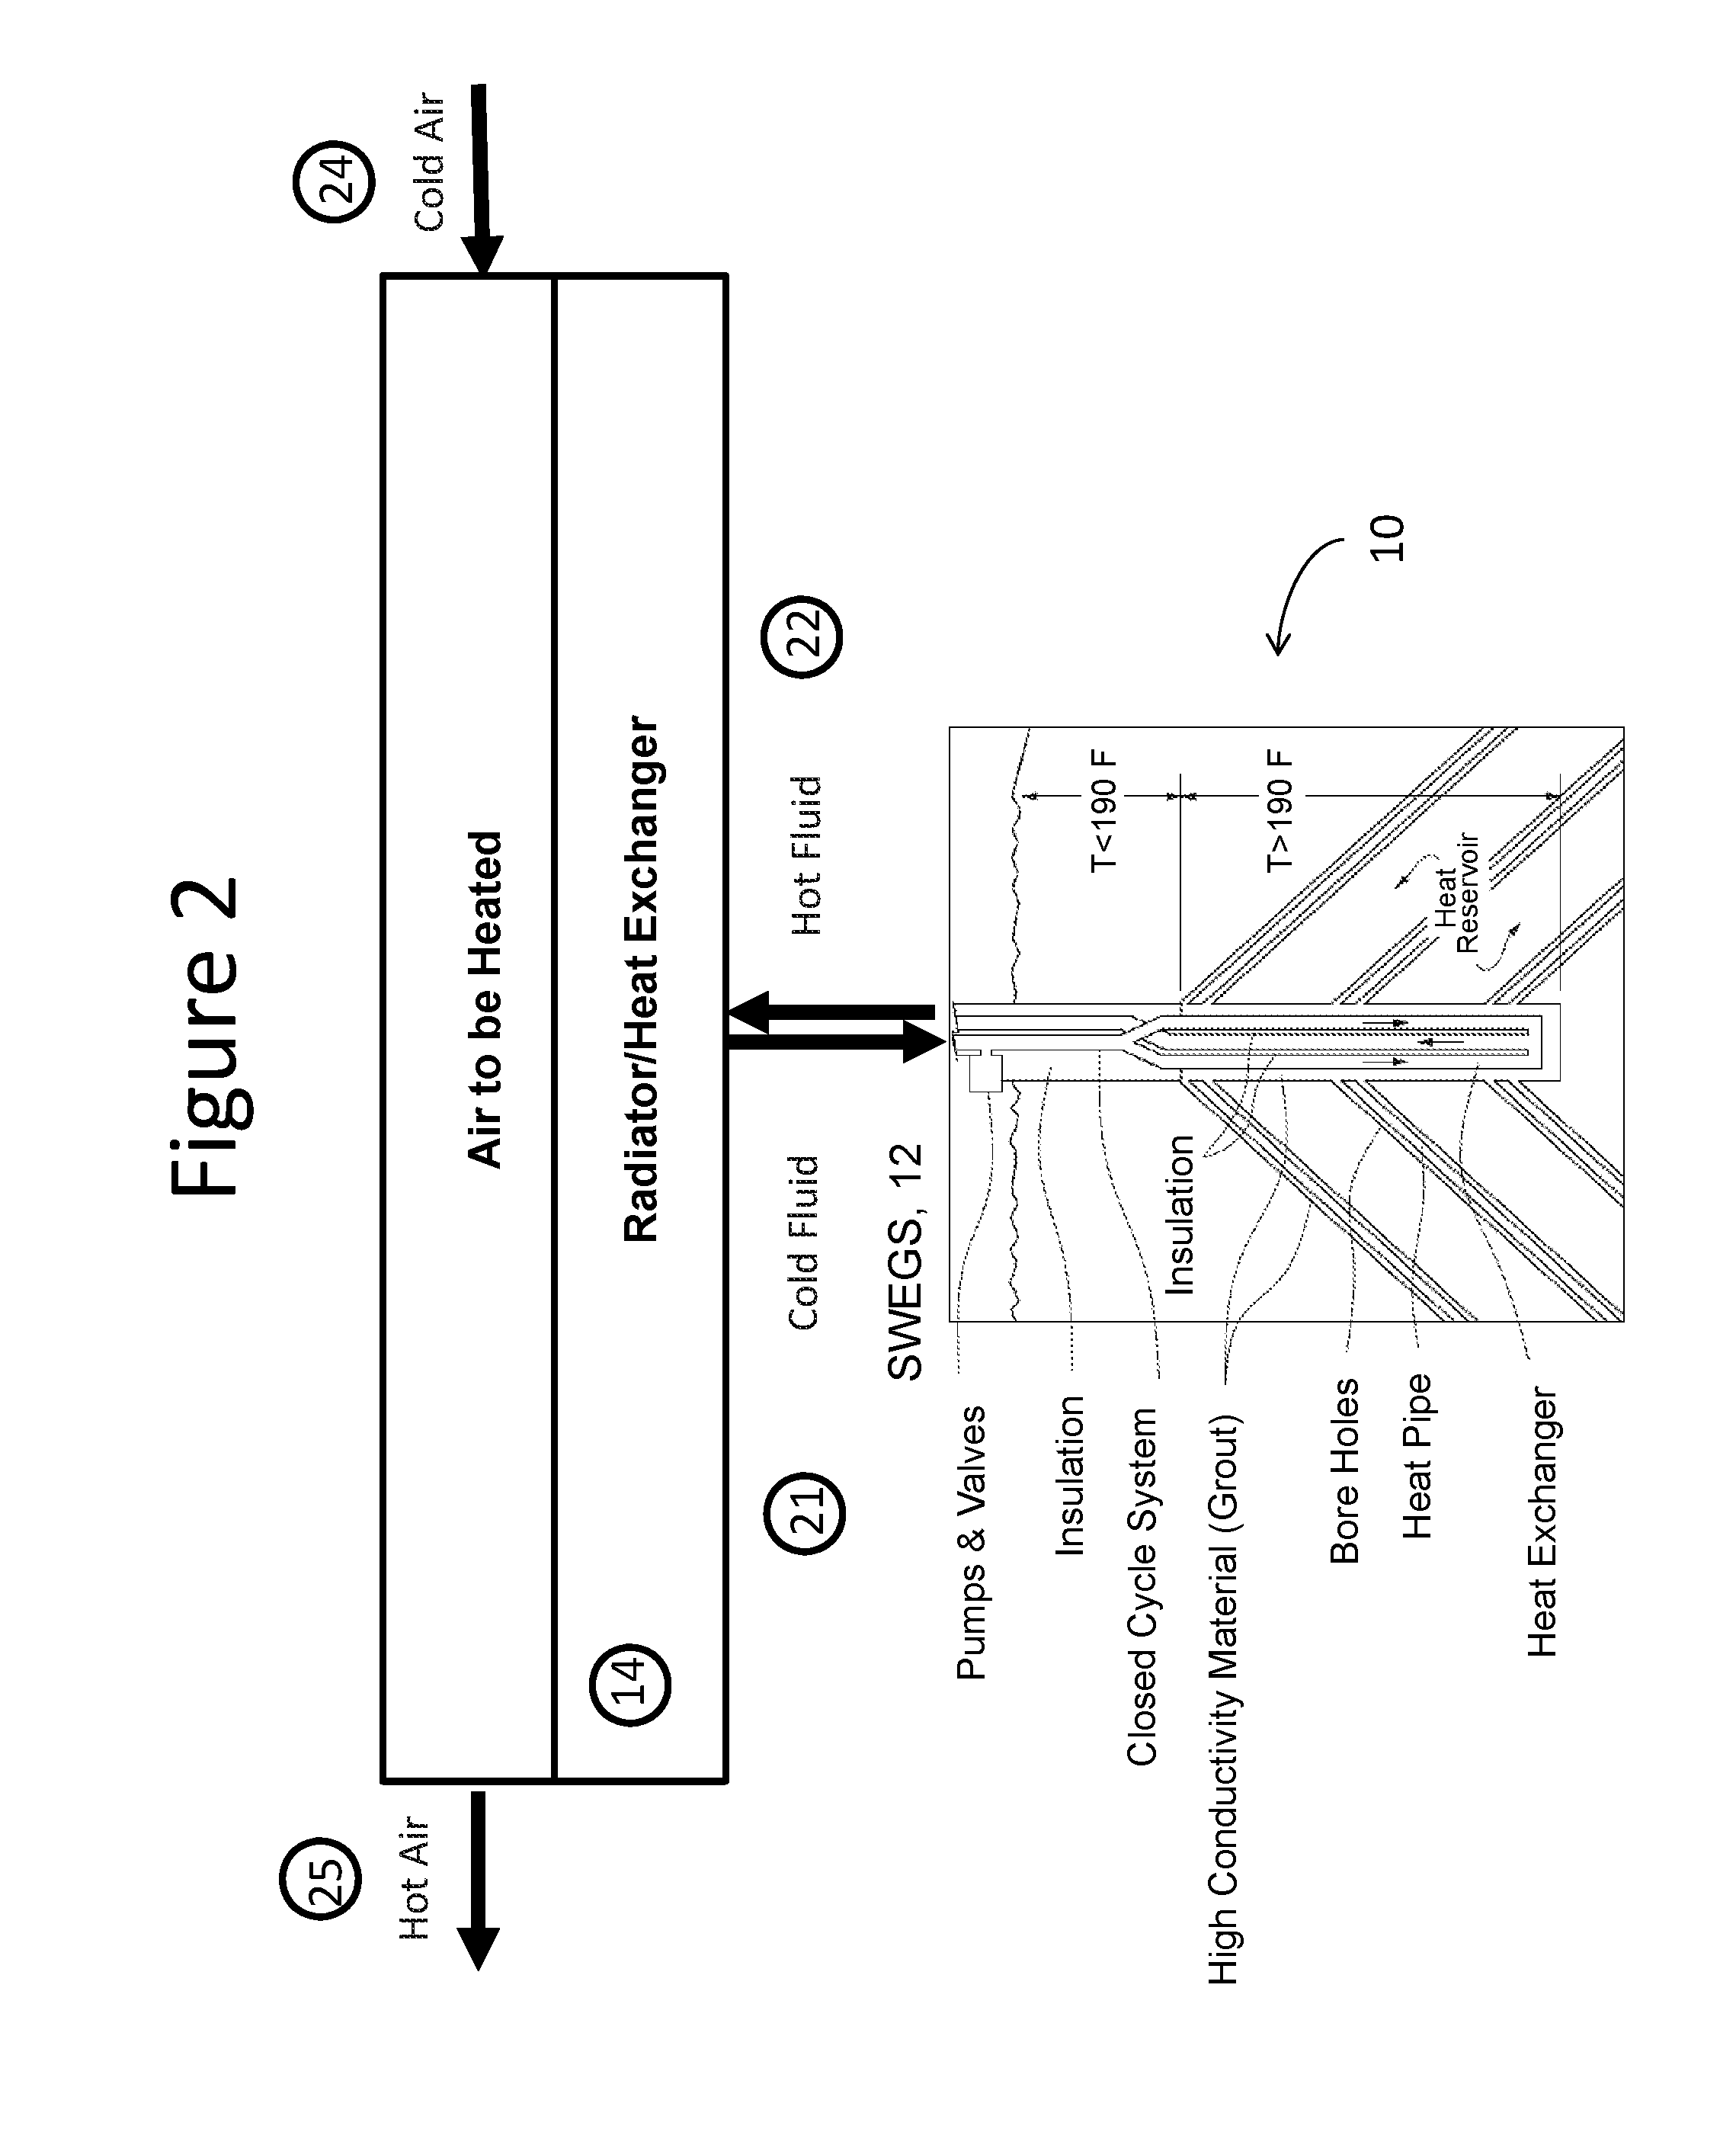 Power tower—system and method of using air flow generated by geothermal generated heat to drive turbines generators for the generation of electricity